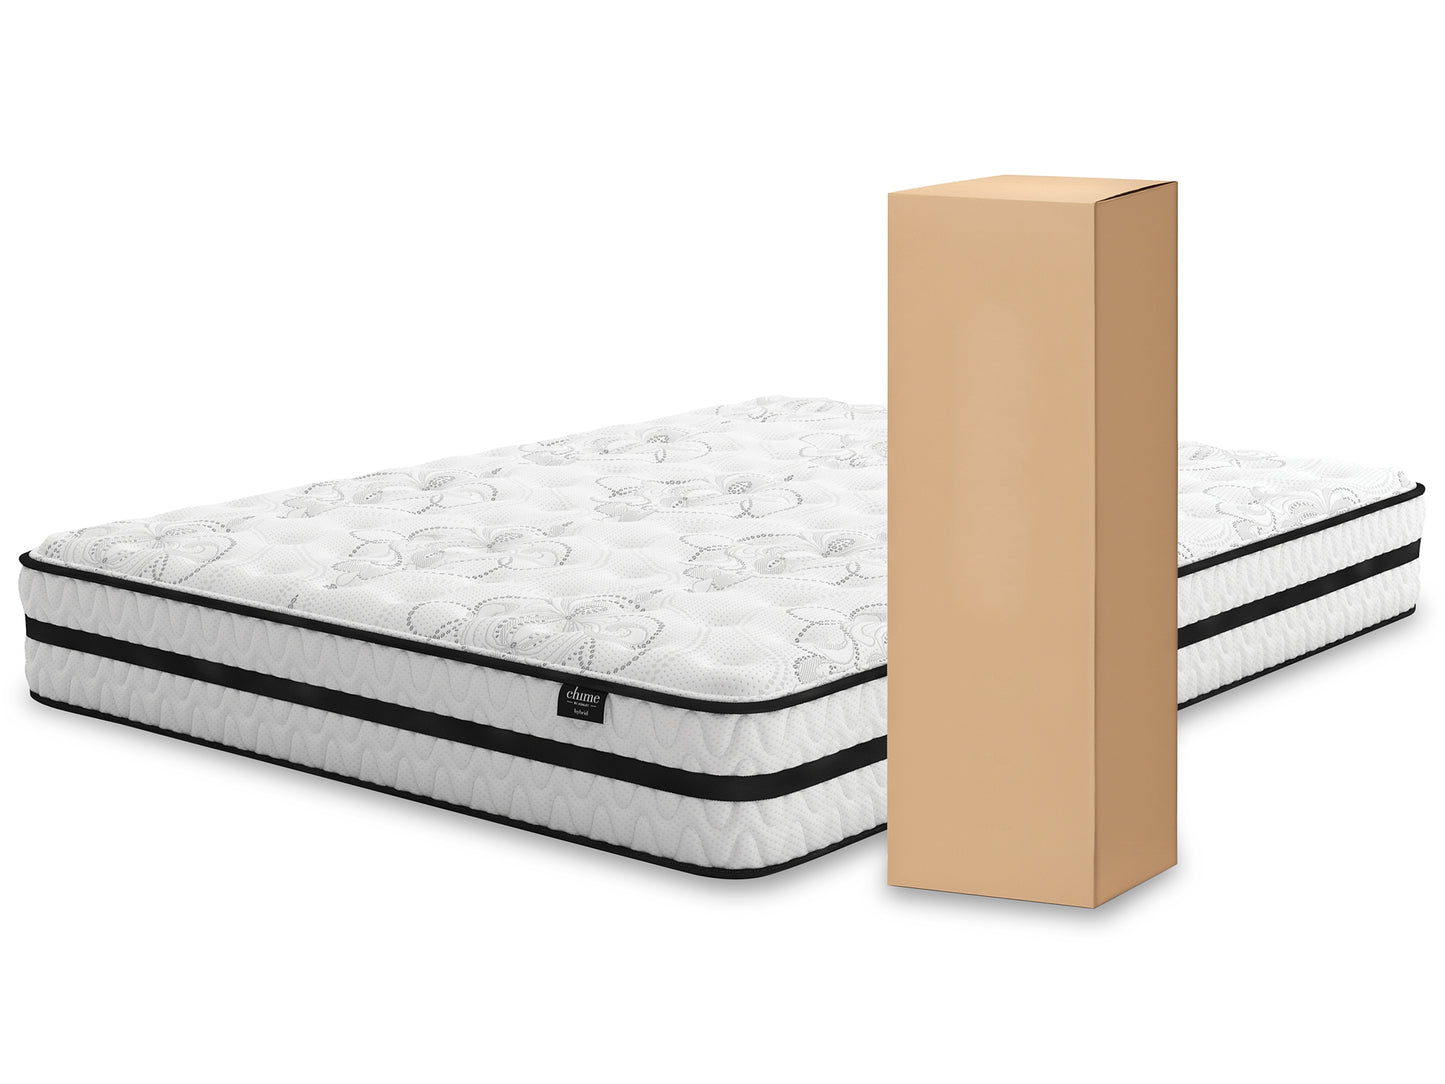 Chime 10 Inch Hybrid 10 Inch Hybrid Mattress with Foundation JB's Furniture  Home Furniture, Home Decor, Furniture Store